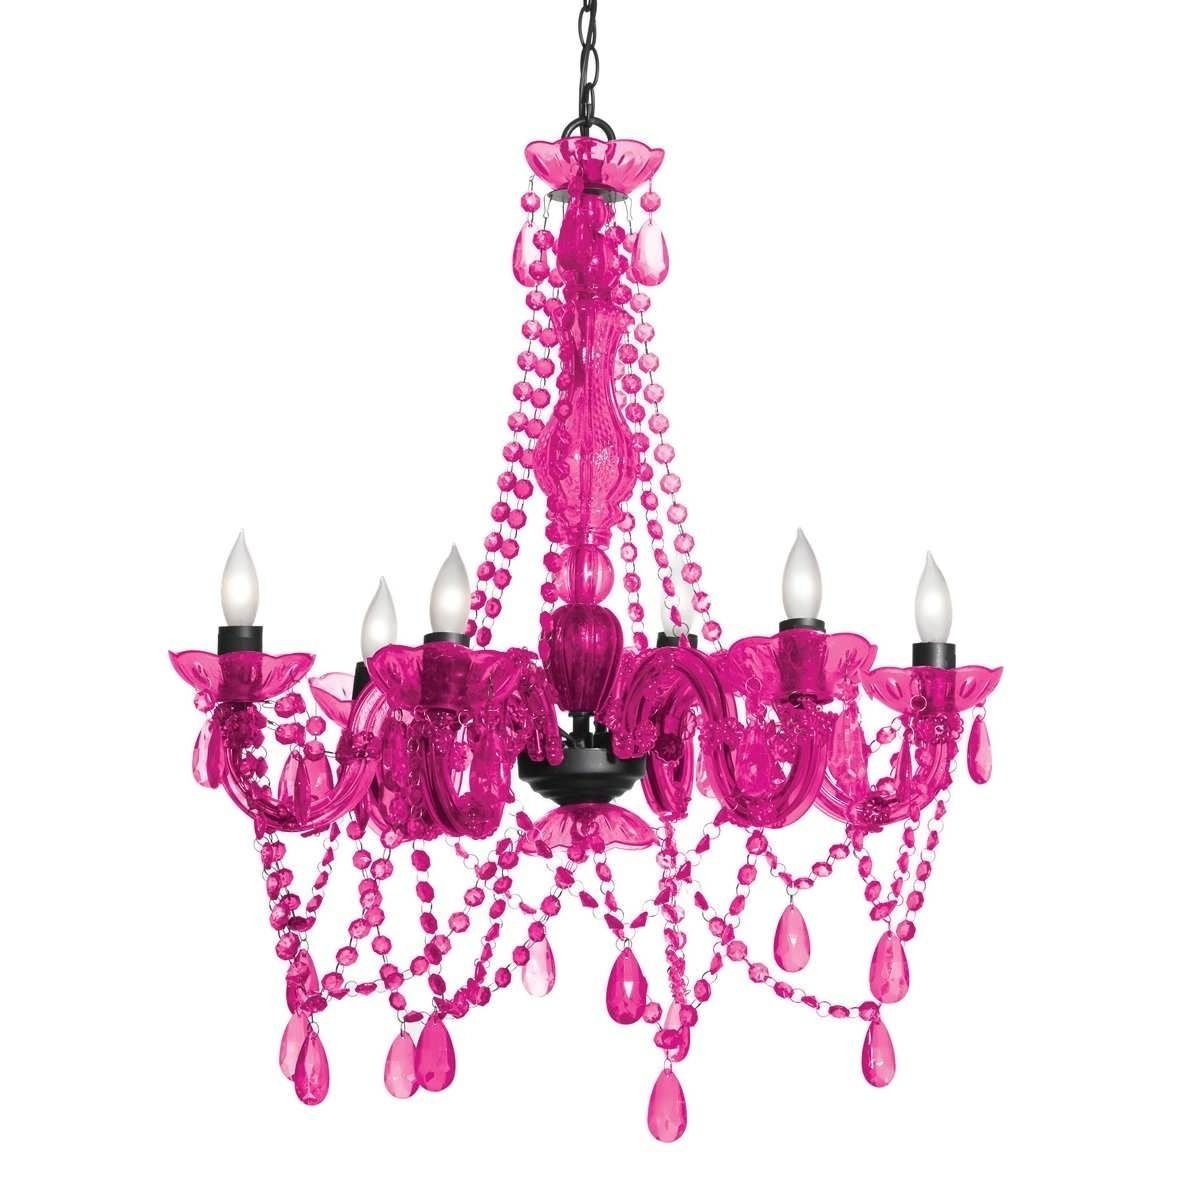 Plastic Chandelier Crystals How Toic Black Chandeliers Large For With Regard To 2018 Pink Plastic Chandeliers (View 3 of 15)